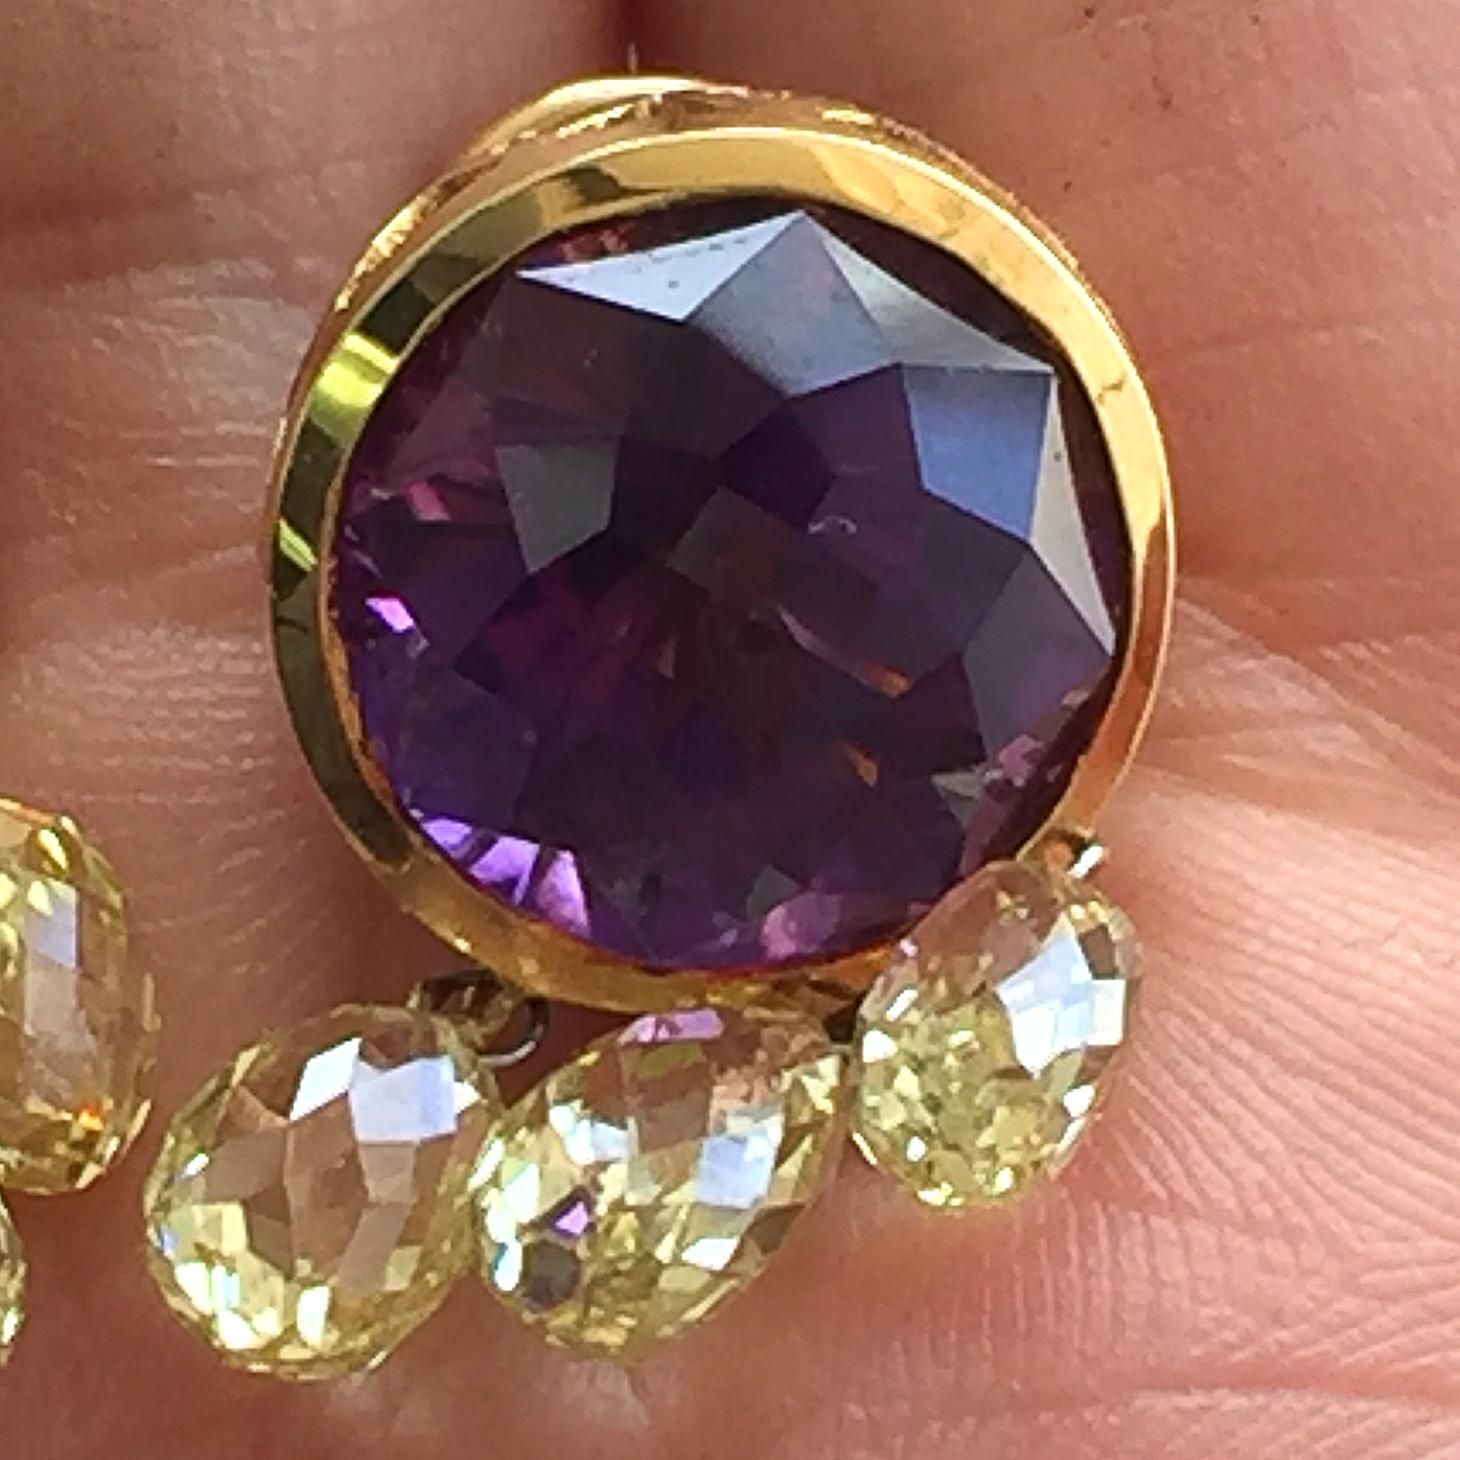 18 Carat Tw Amethyst and Yellow Diamond Briolettes Earrings, Diamond Briolettes of this size are very expensive and hard to get.


Amethyst Details:
Number of stones: 2
Carat Weight: 11.70 
Shape: Round
Color: Purple
Clarity: Super Clean No Visible